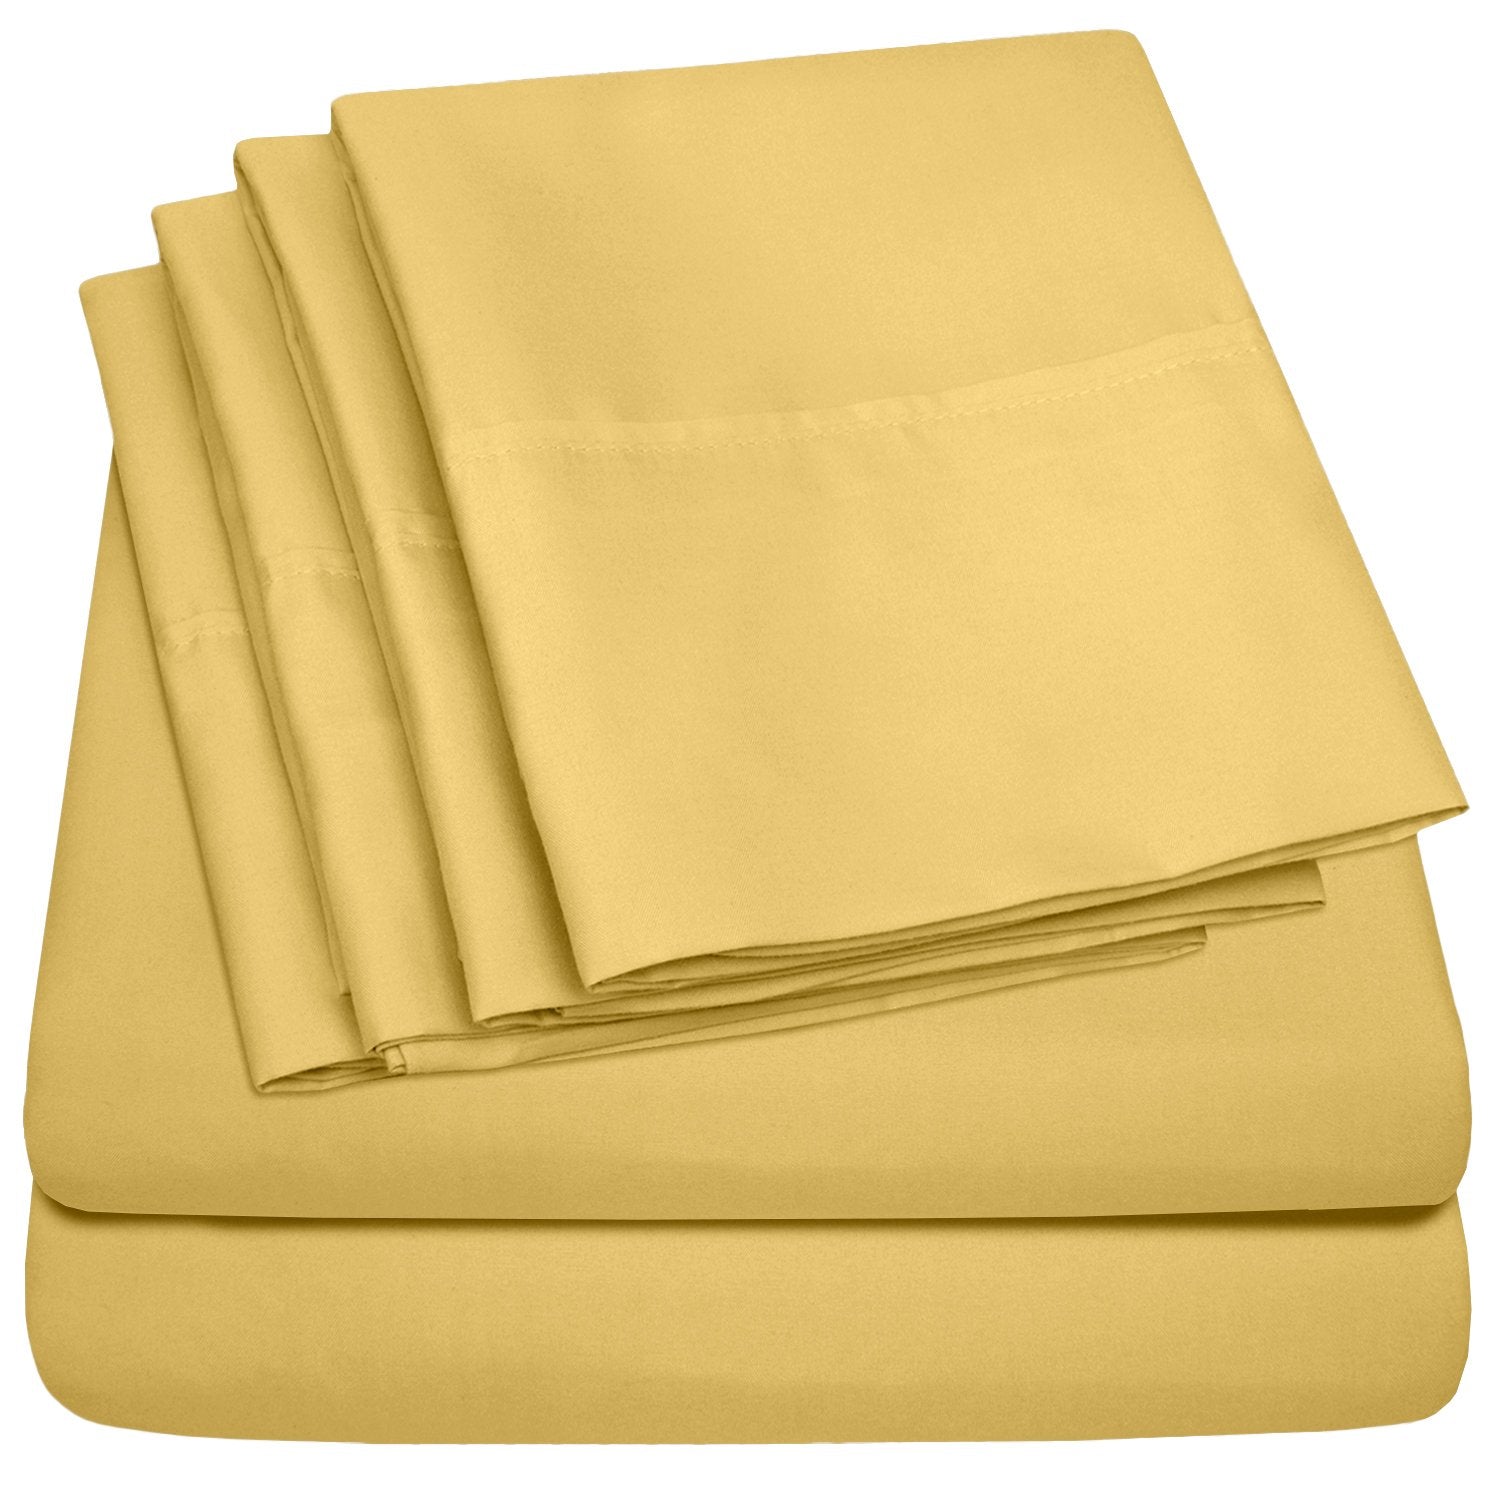 Deluxe 6-Piece Bed Sheet Set (Yellow) - Folded